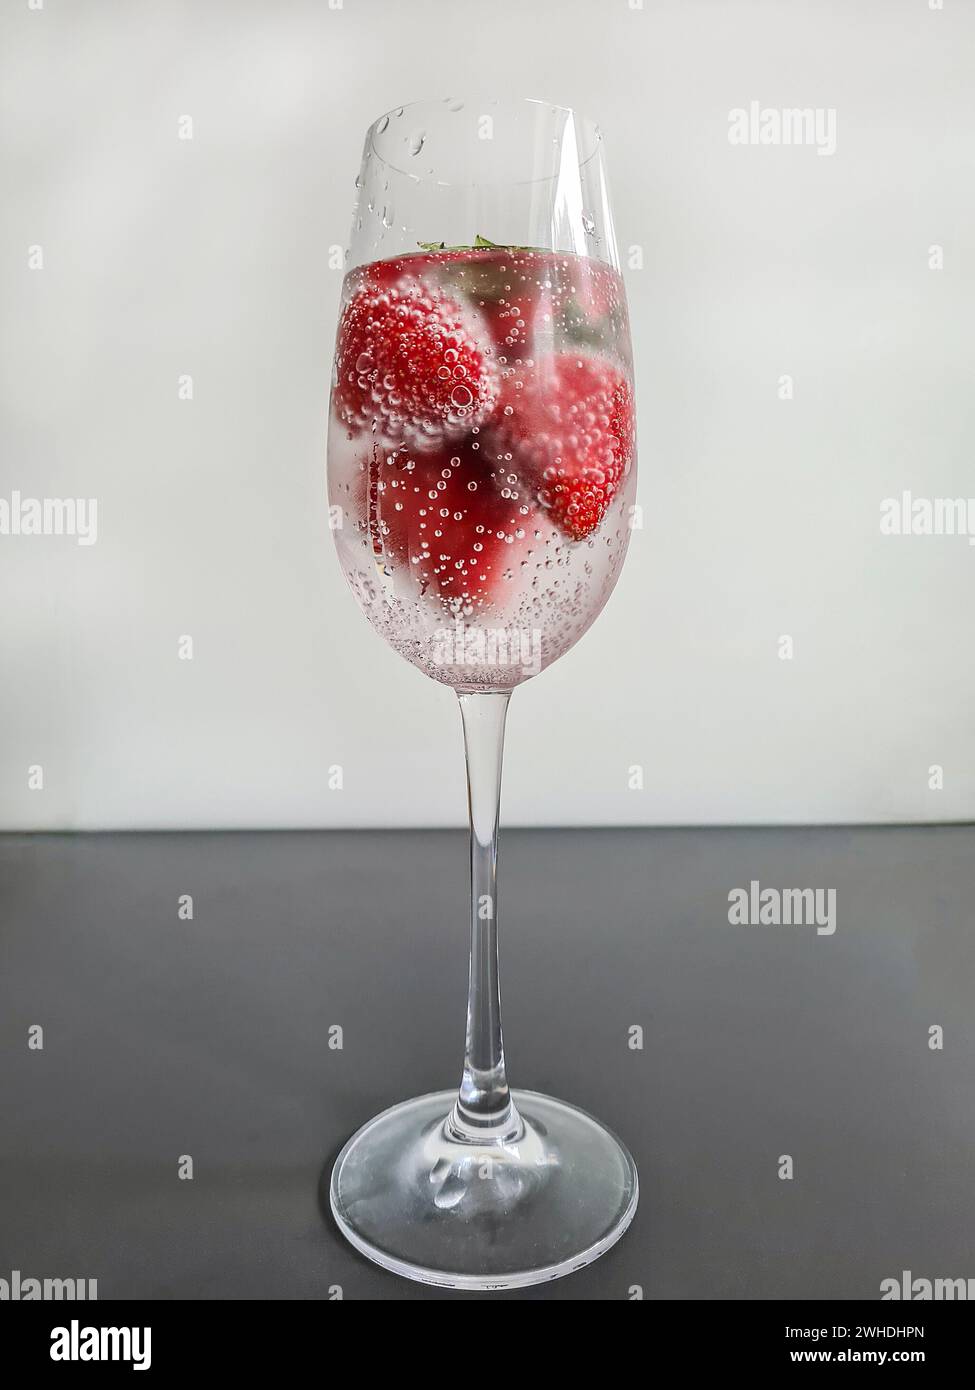 Fresh red whole ripe strawberries with mineral water in a champagne glass as a non-alcoholic refreshing drink in summer Stock Photo